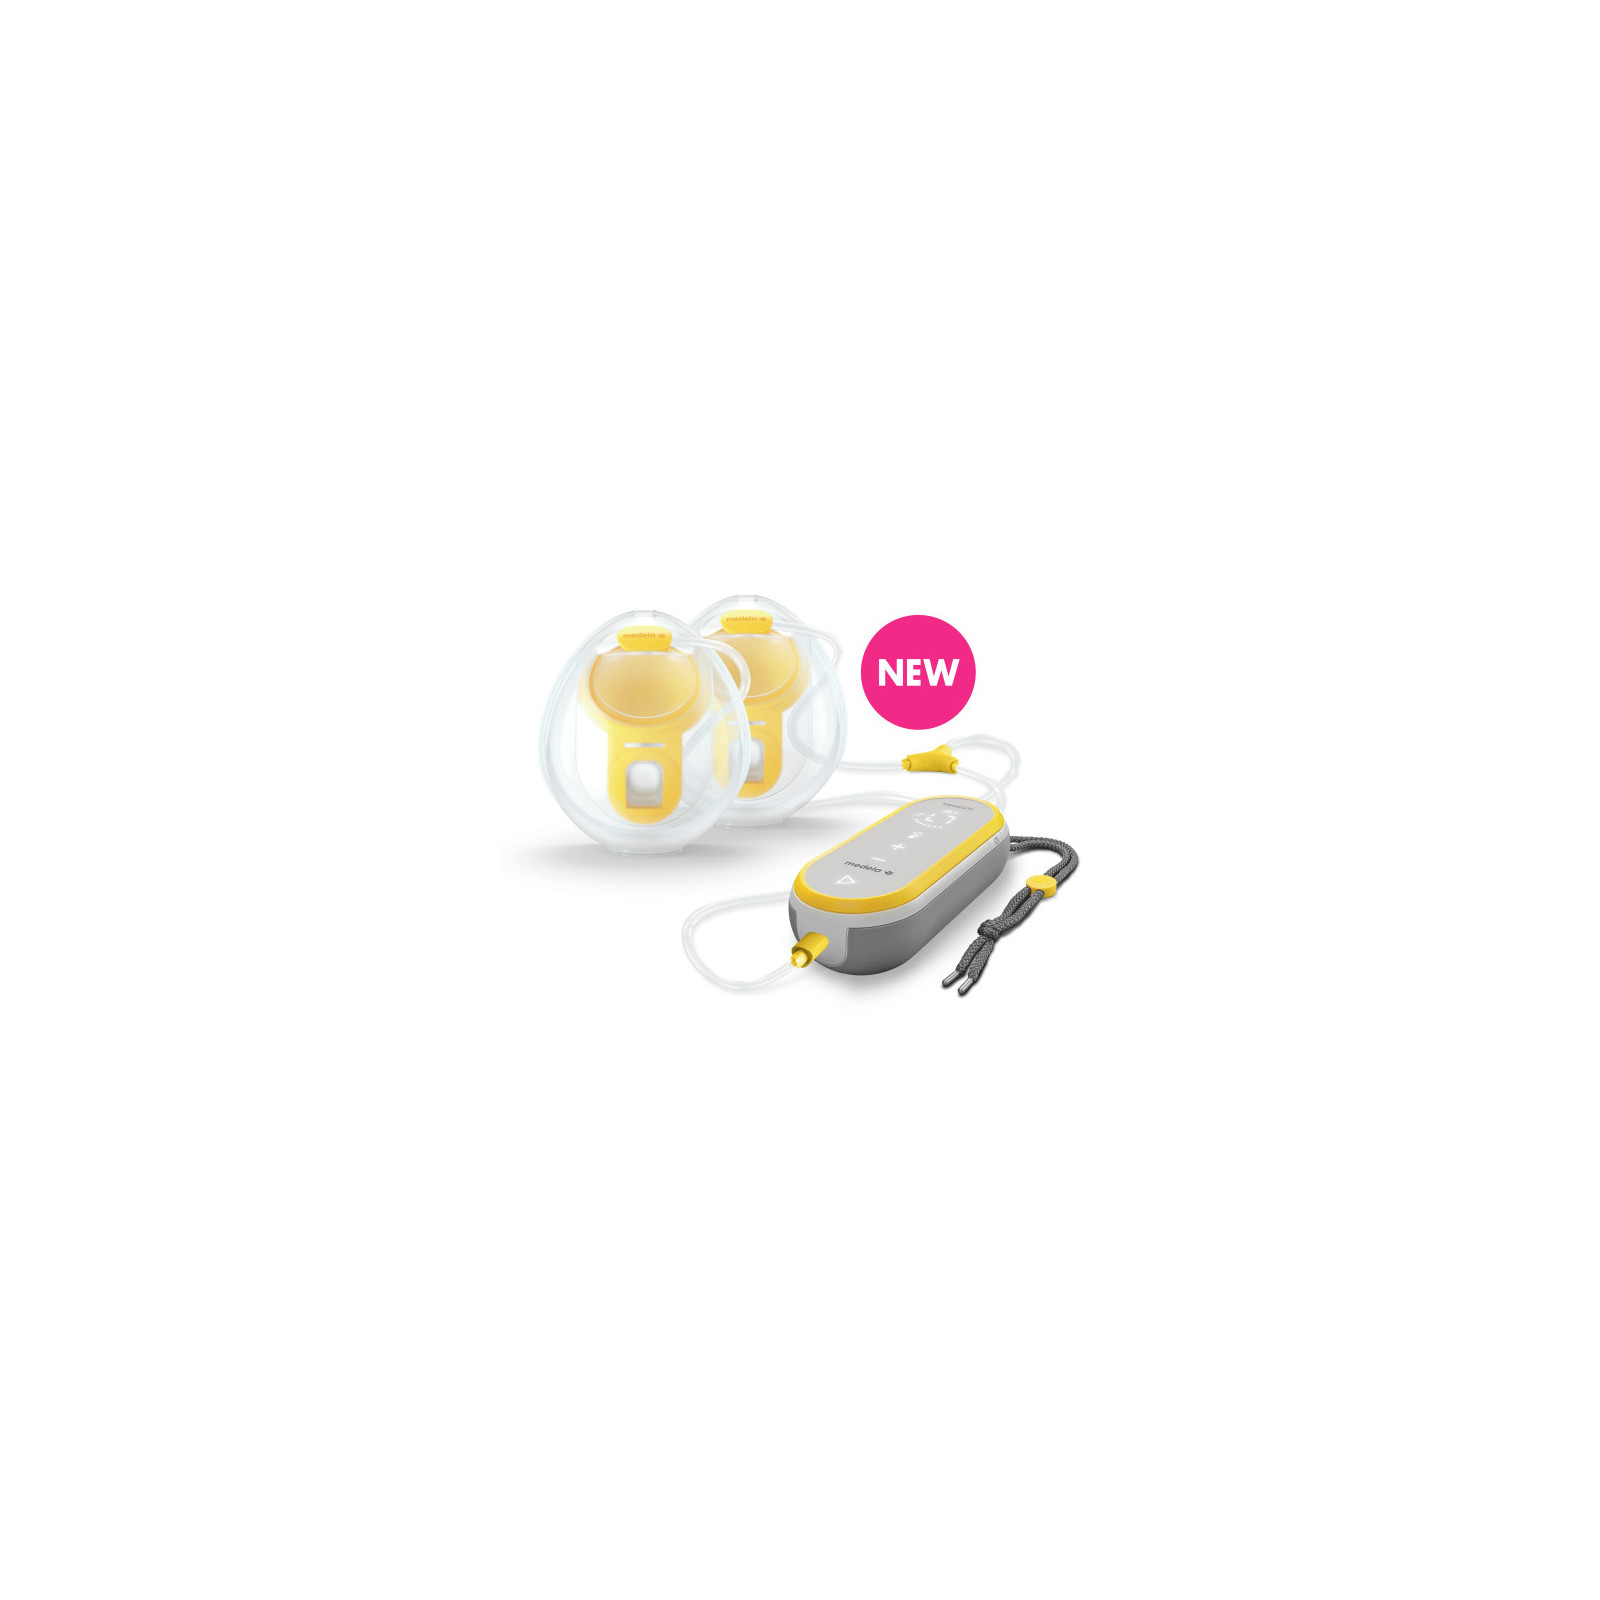 Medela Freestyle Flex/Hands Free Double Electric Breast Pump